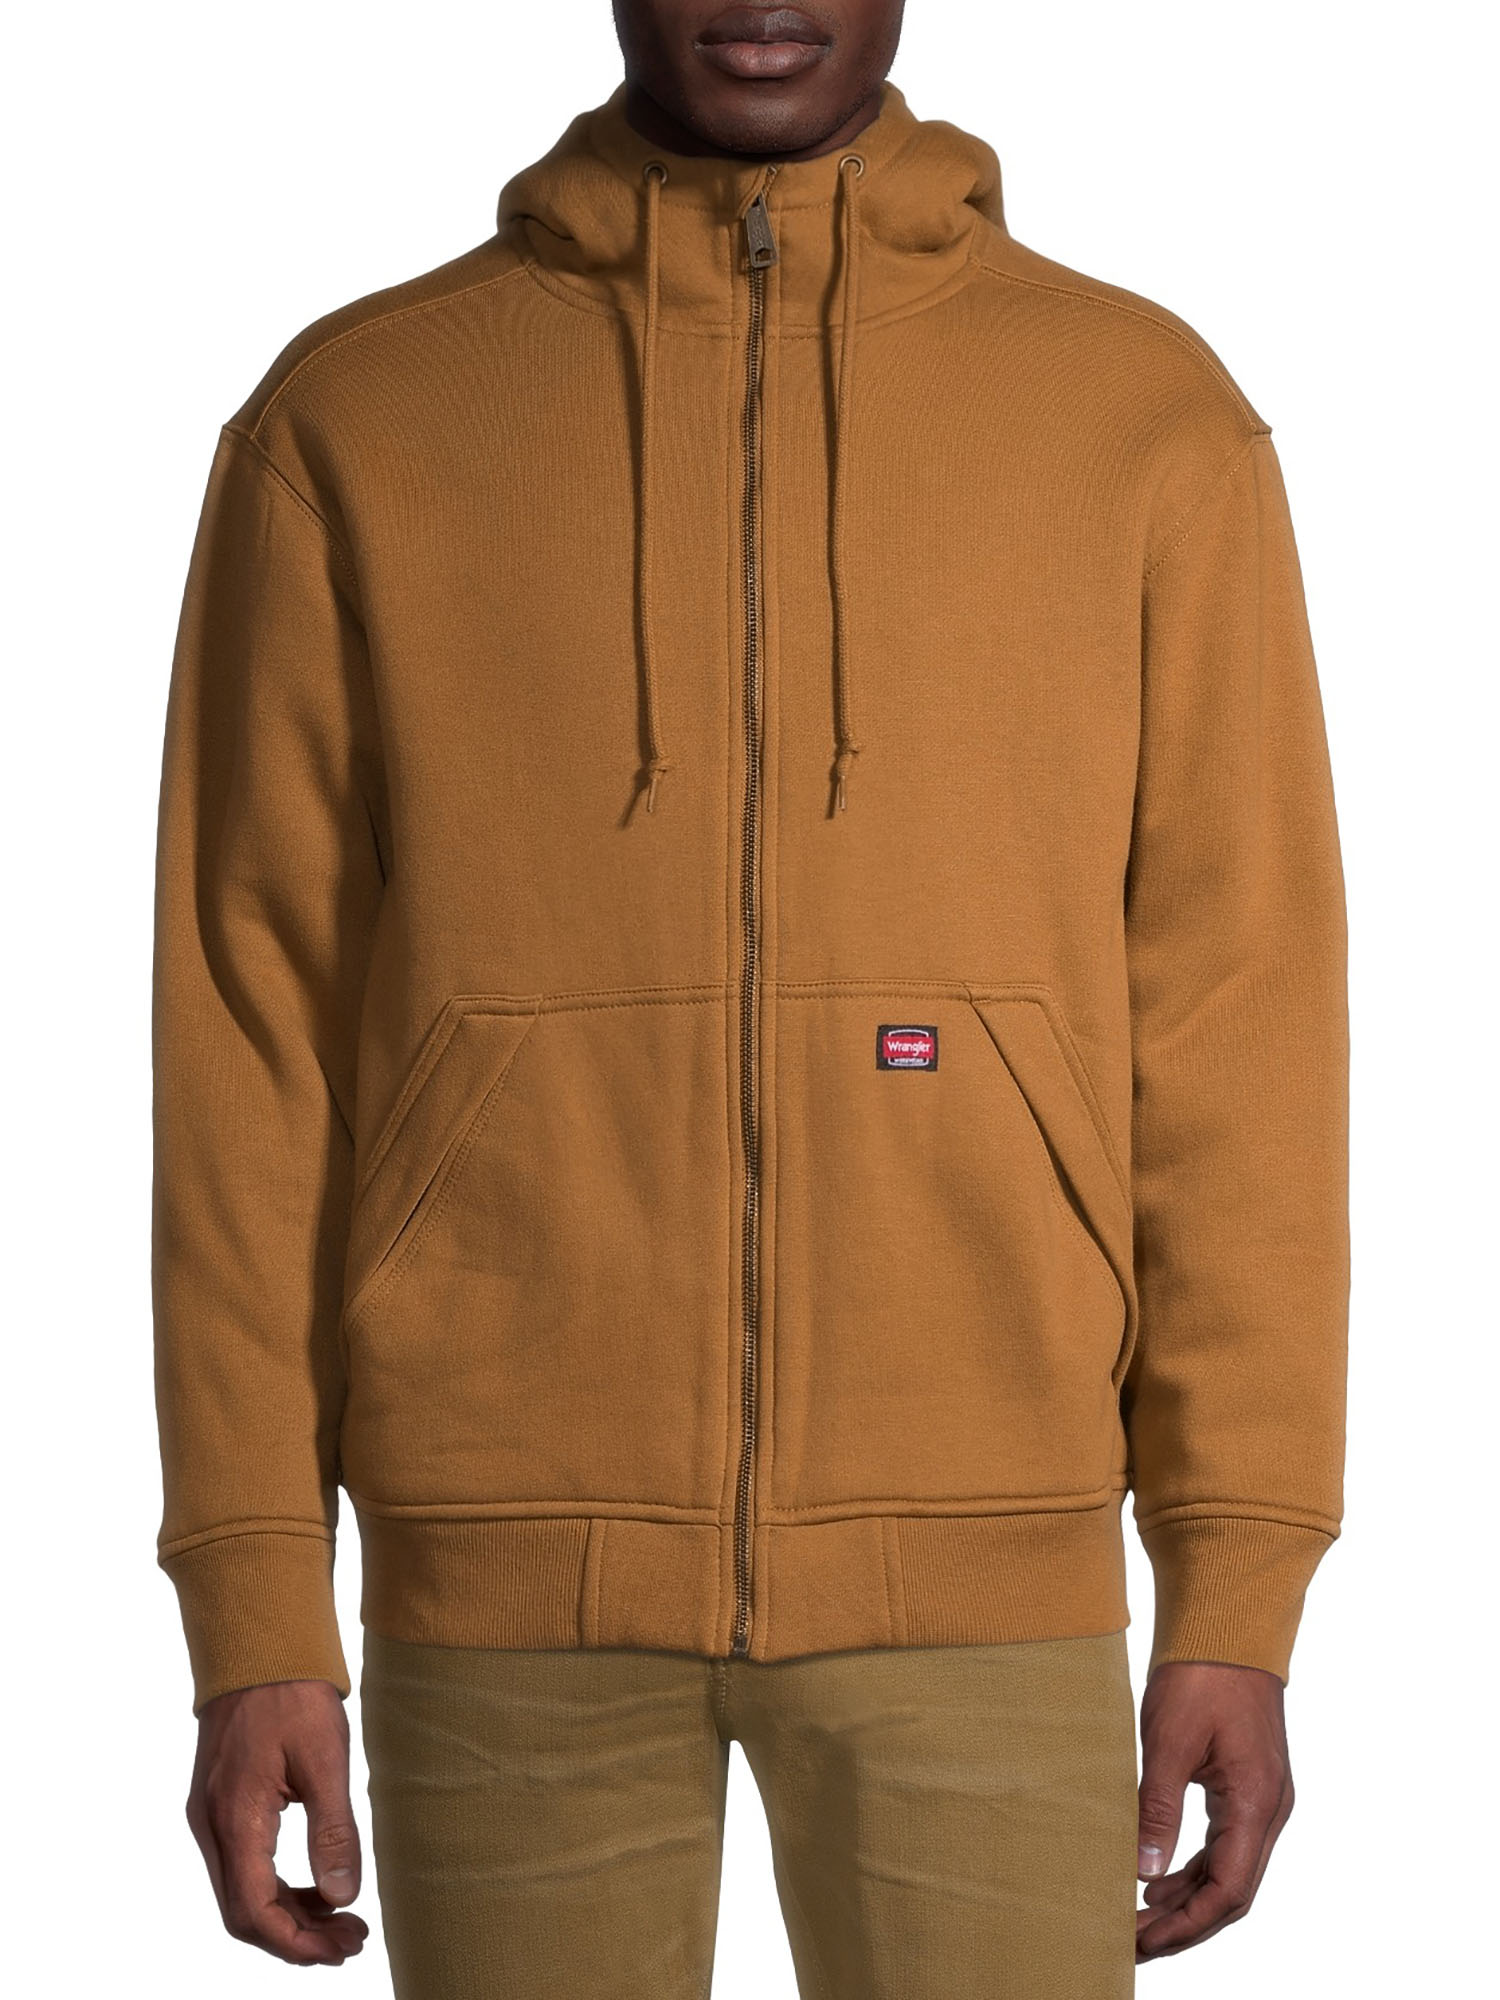 Wrangler Workwear Men's Guardian Heavy Weight Faux Sherpa and Quilt Lined Hoodie - image 1 of 6